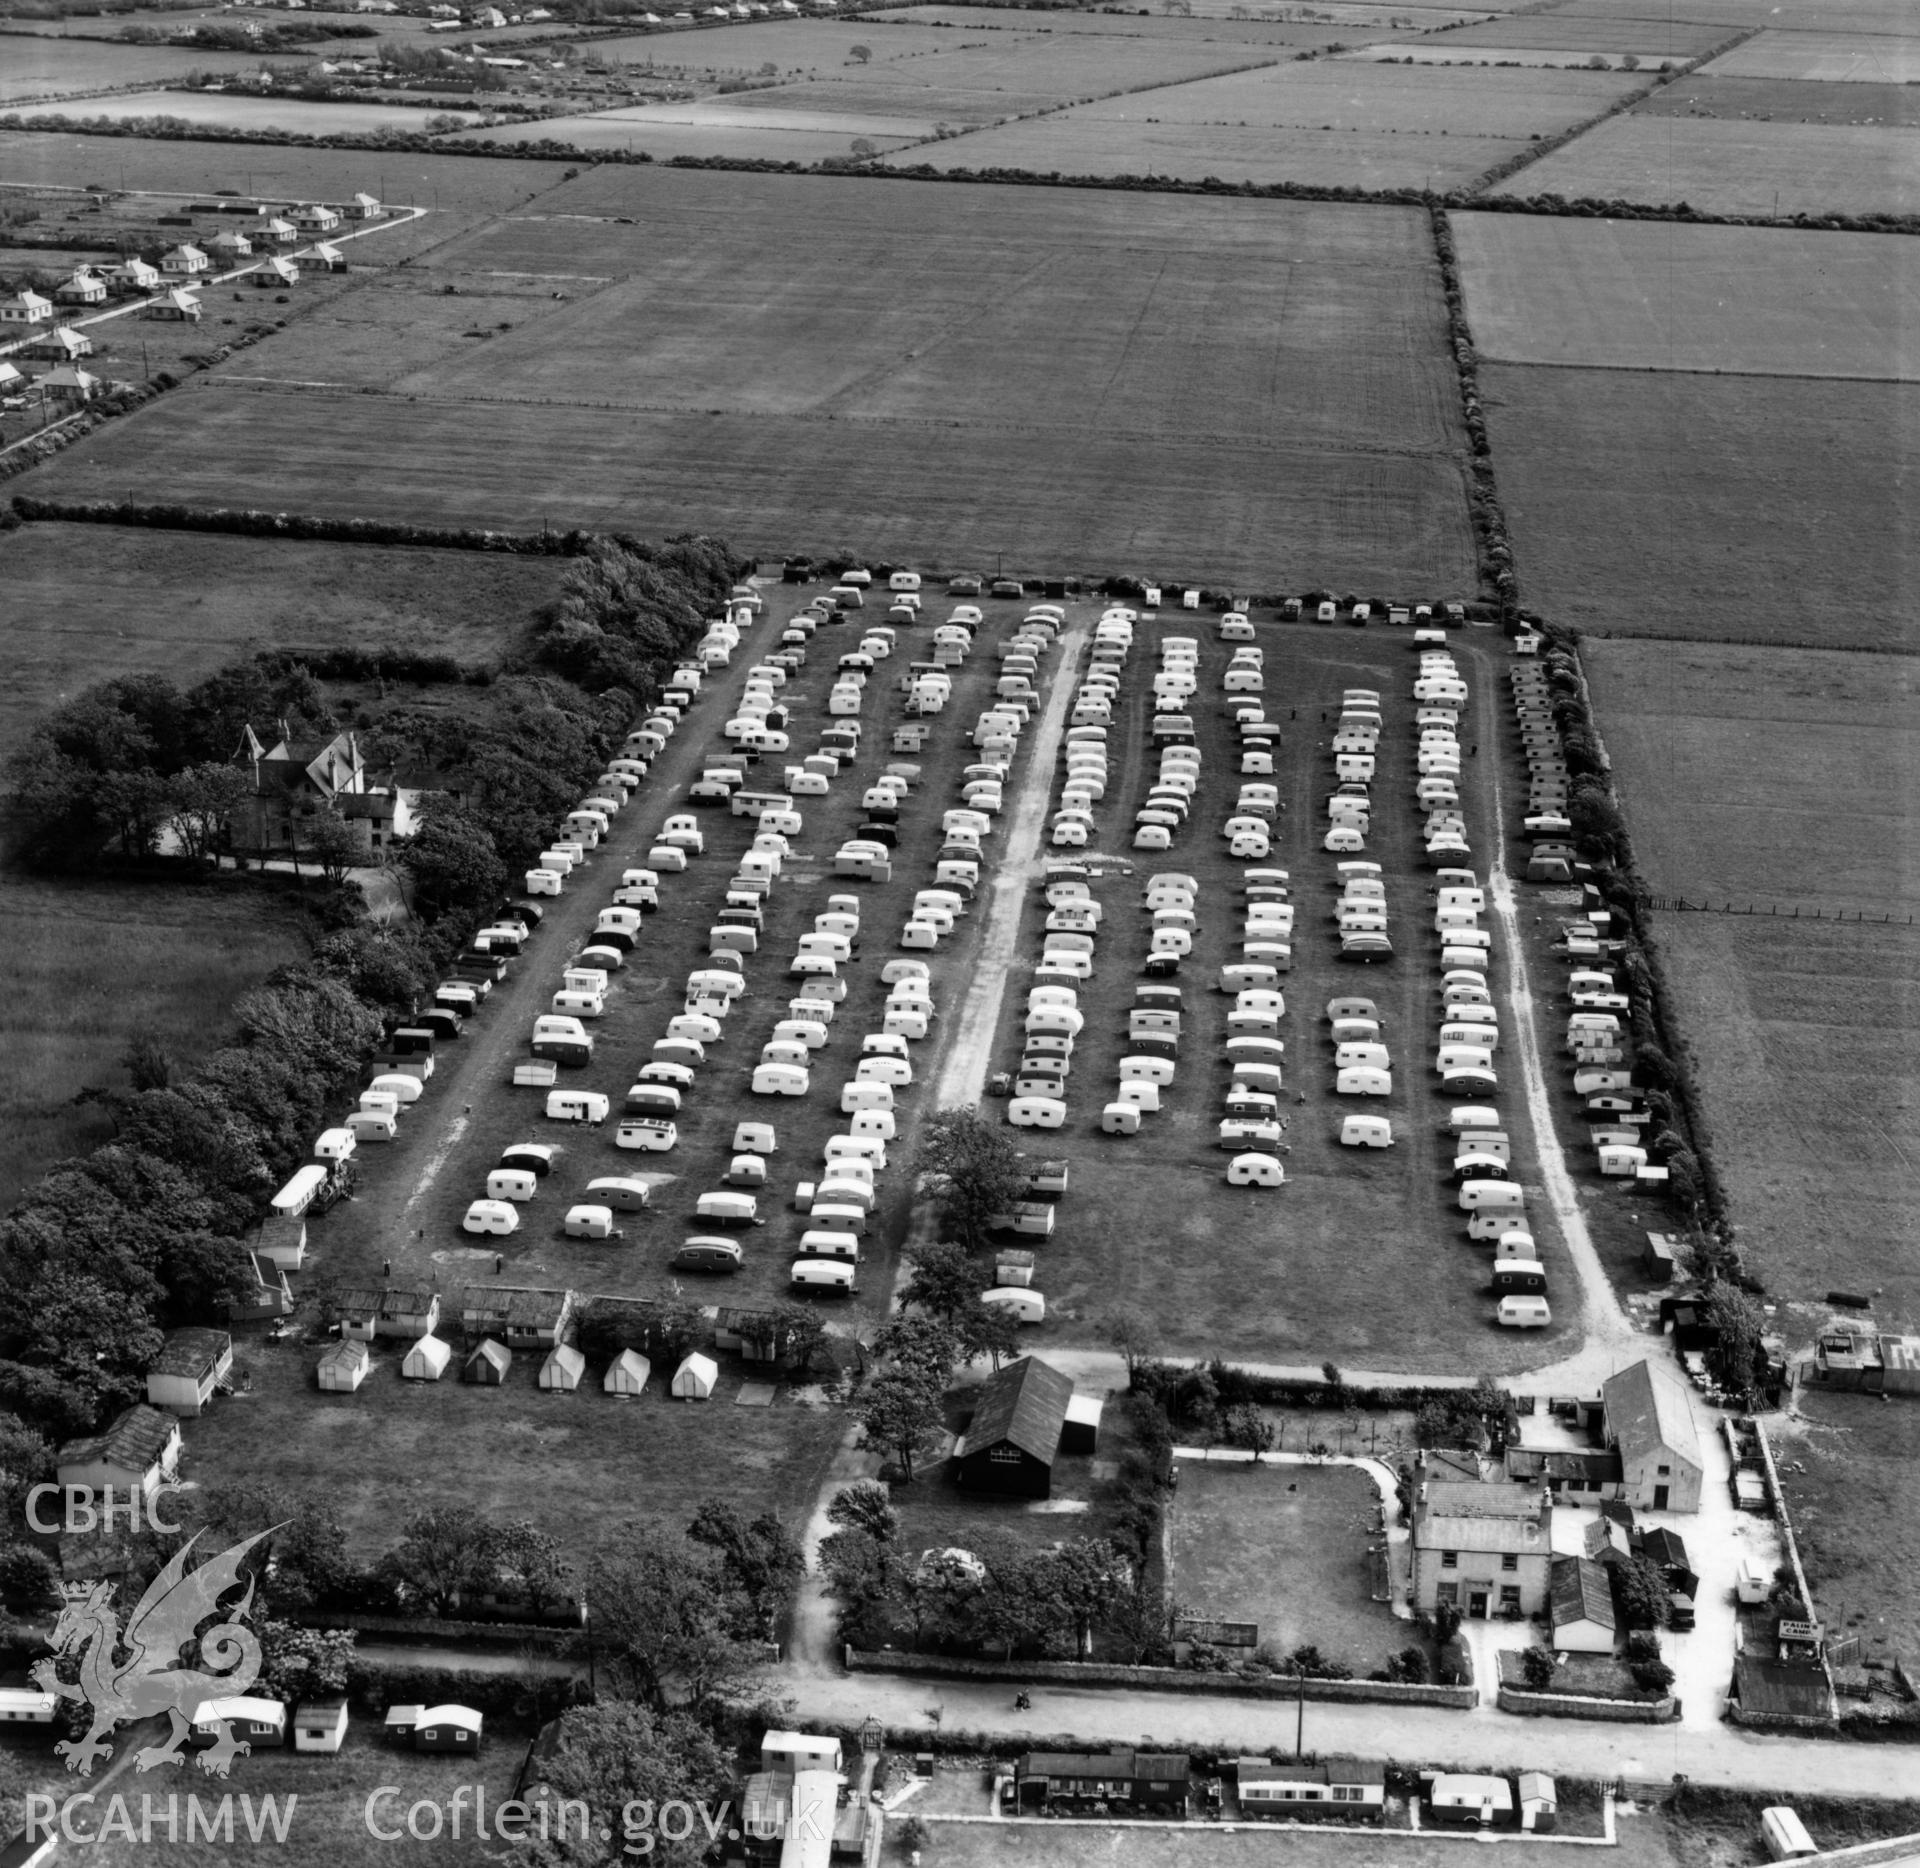 View of Palin's Holiday Camp, Foryd, commissioned by W.H.Smith & Son Ltd.. Oblique aerial photograph, 5?" cut roll film.